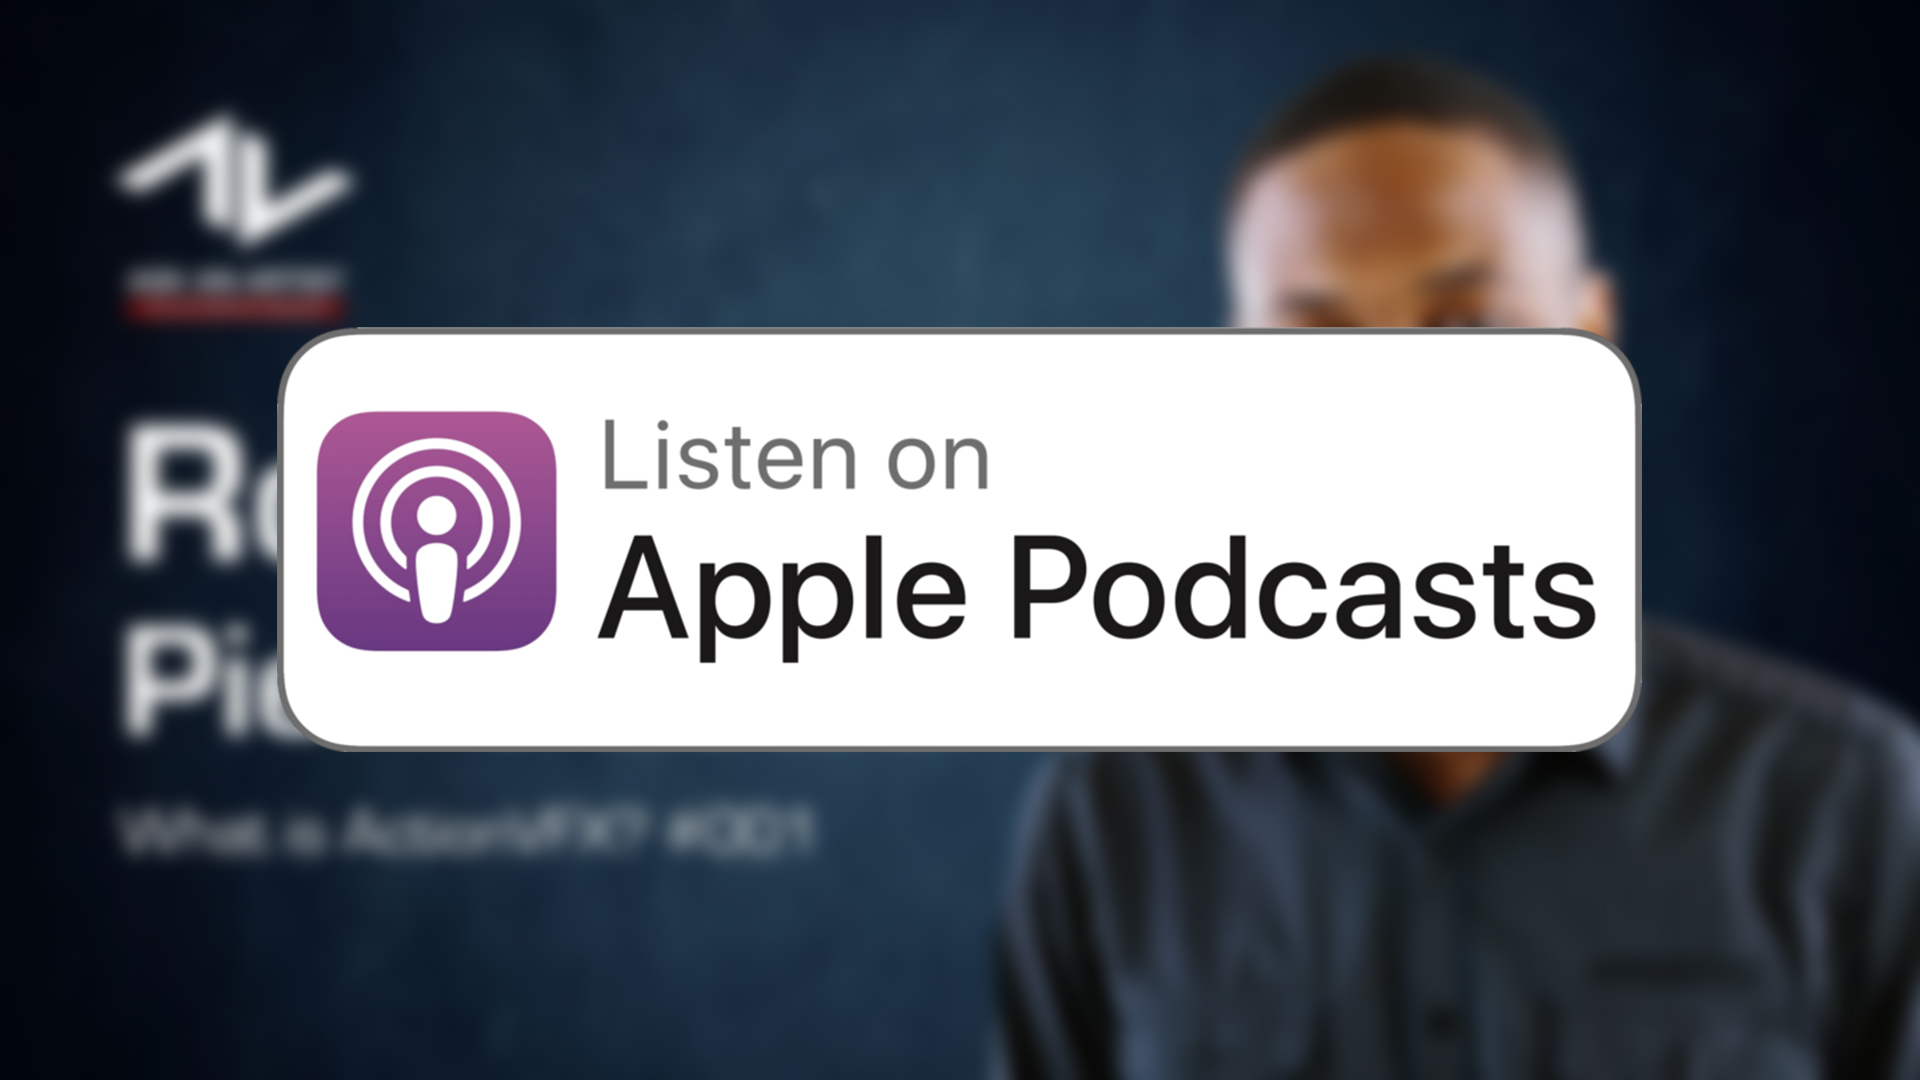 Listen to episode one on Apple Podcasts.